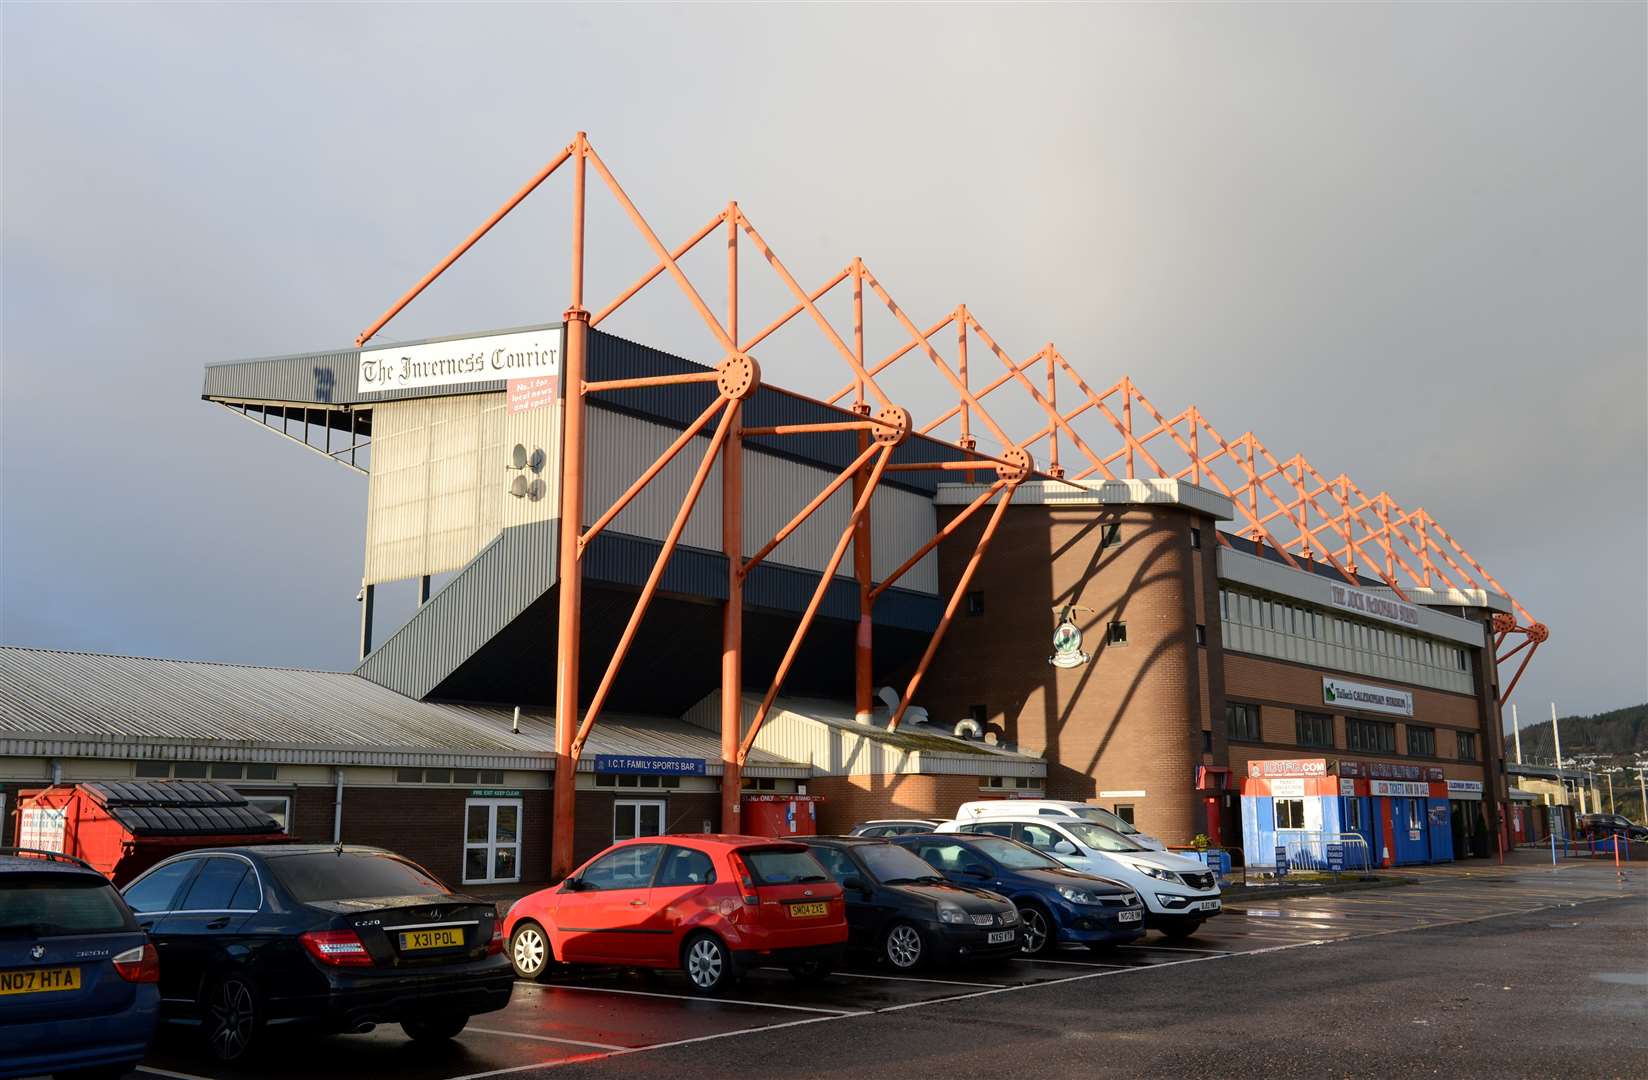 The Caledonian Stadium will offered to host the Scottish Cup final